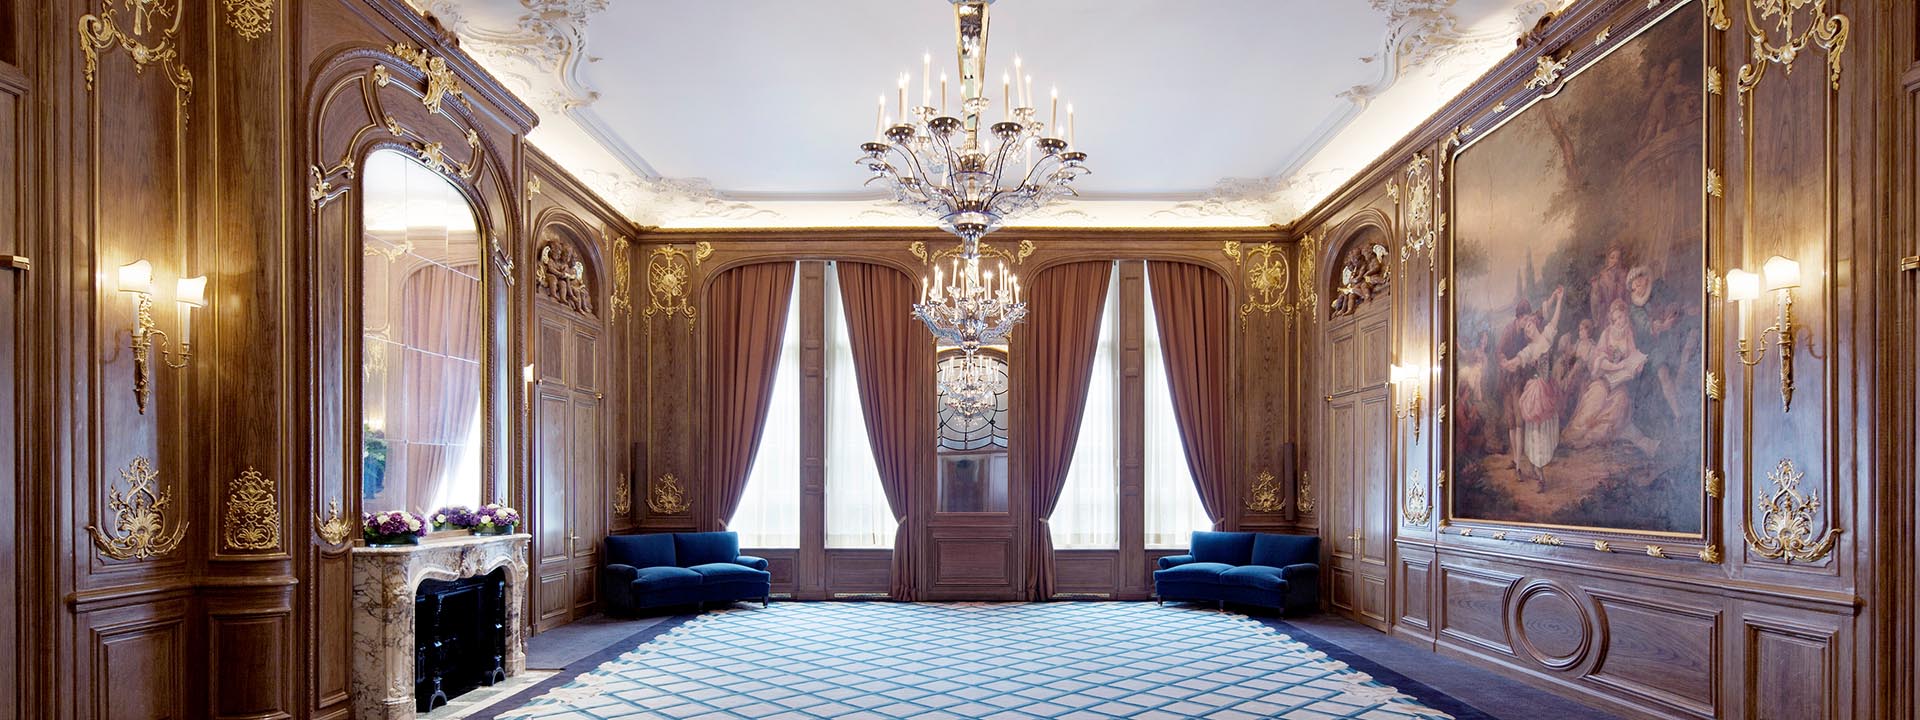 View of the French Salon and original marble mantelpiece, as well as elegant chandeliers.